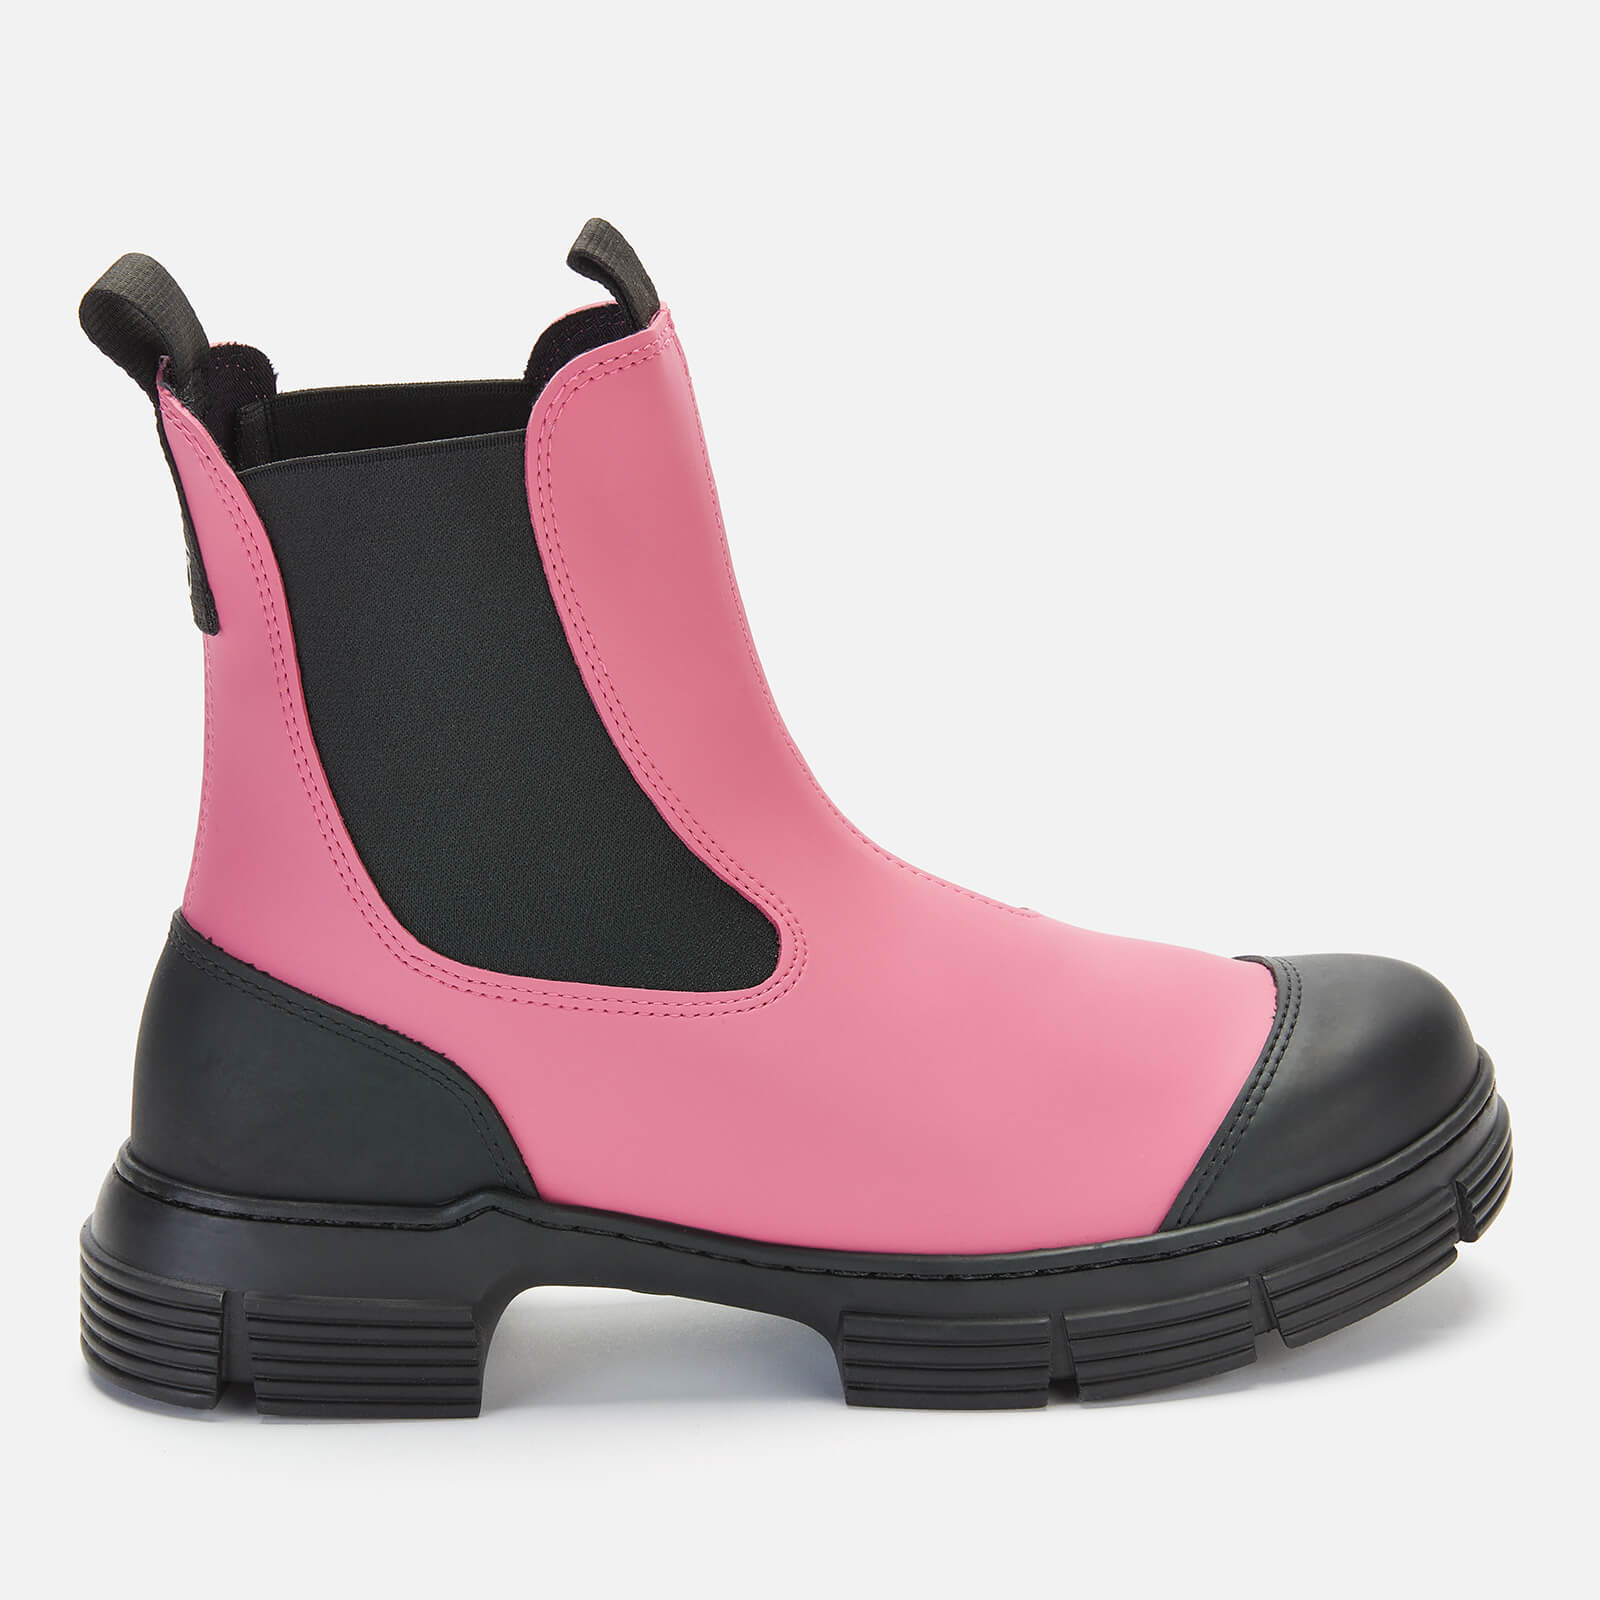 Ganni Women's Recycled Rubber Chelsea Boots - Shocking Pink - UK 3